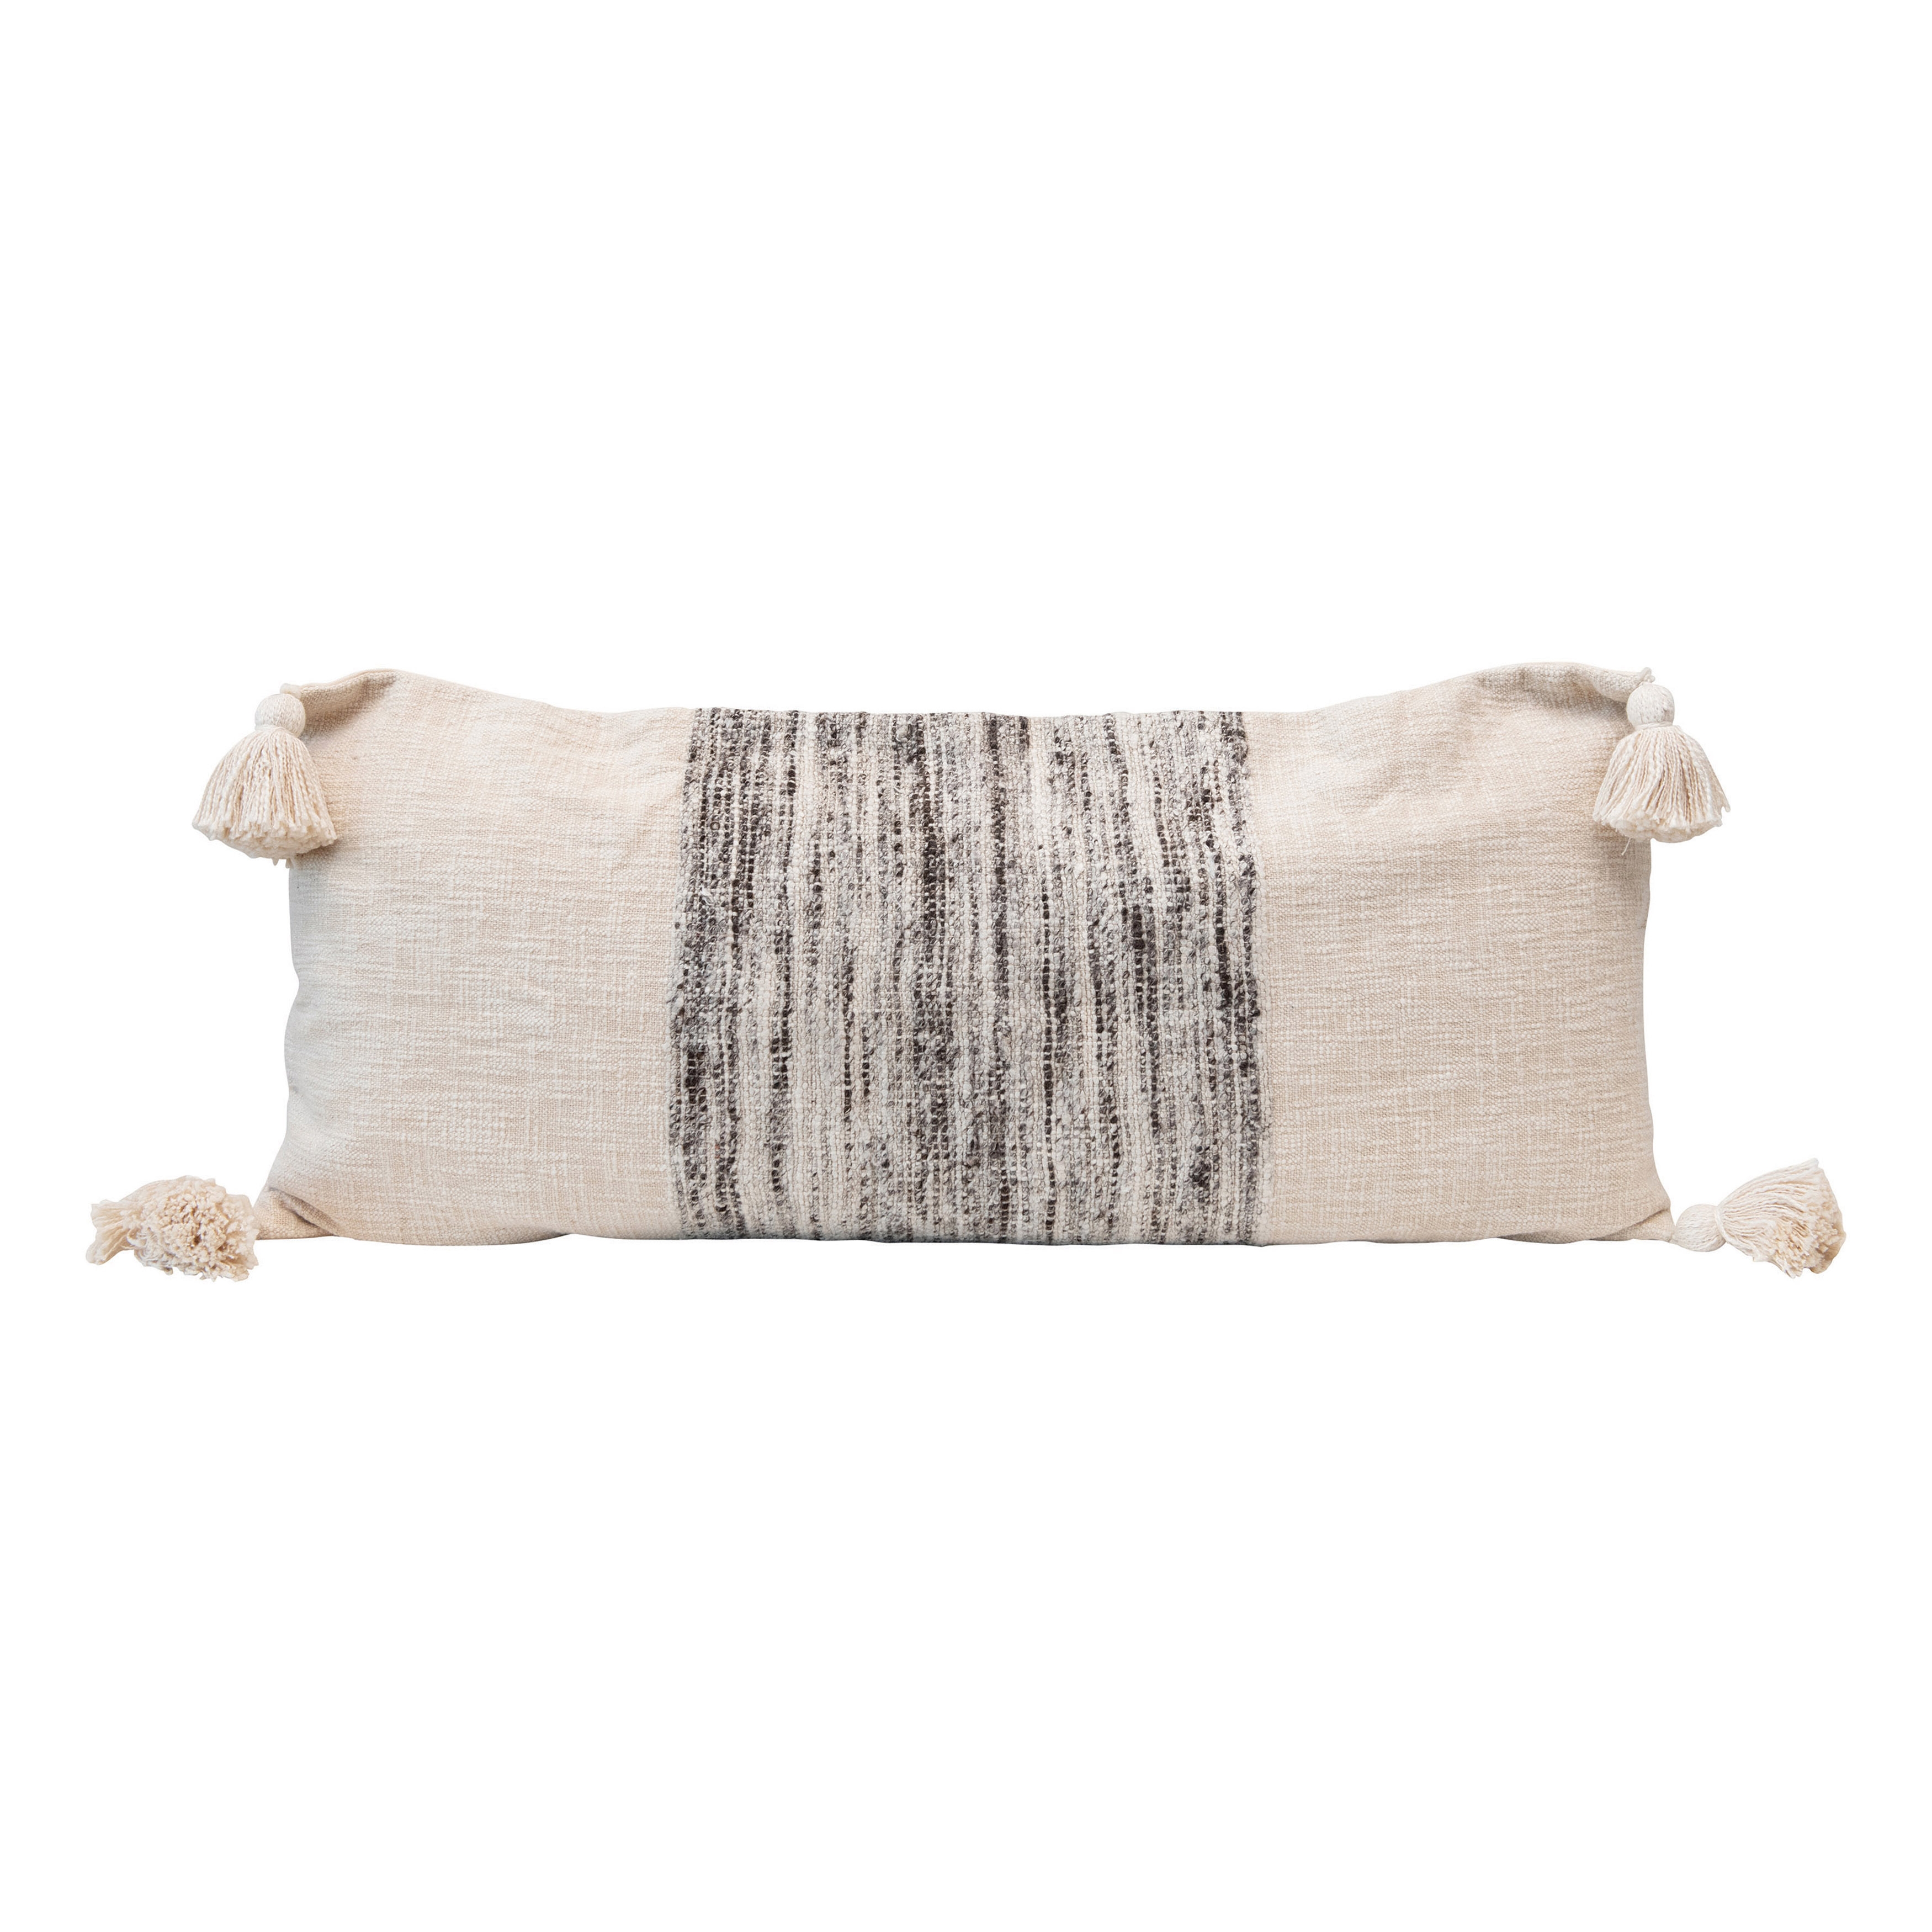 Woven Cotton Blend Lumbar Pillow with Variegated Grey Yarns & Tassels, Cream Color - Image 0